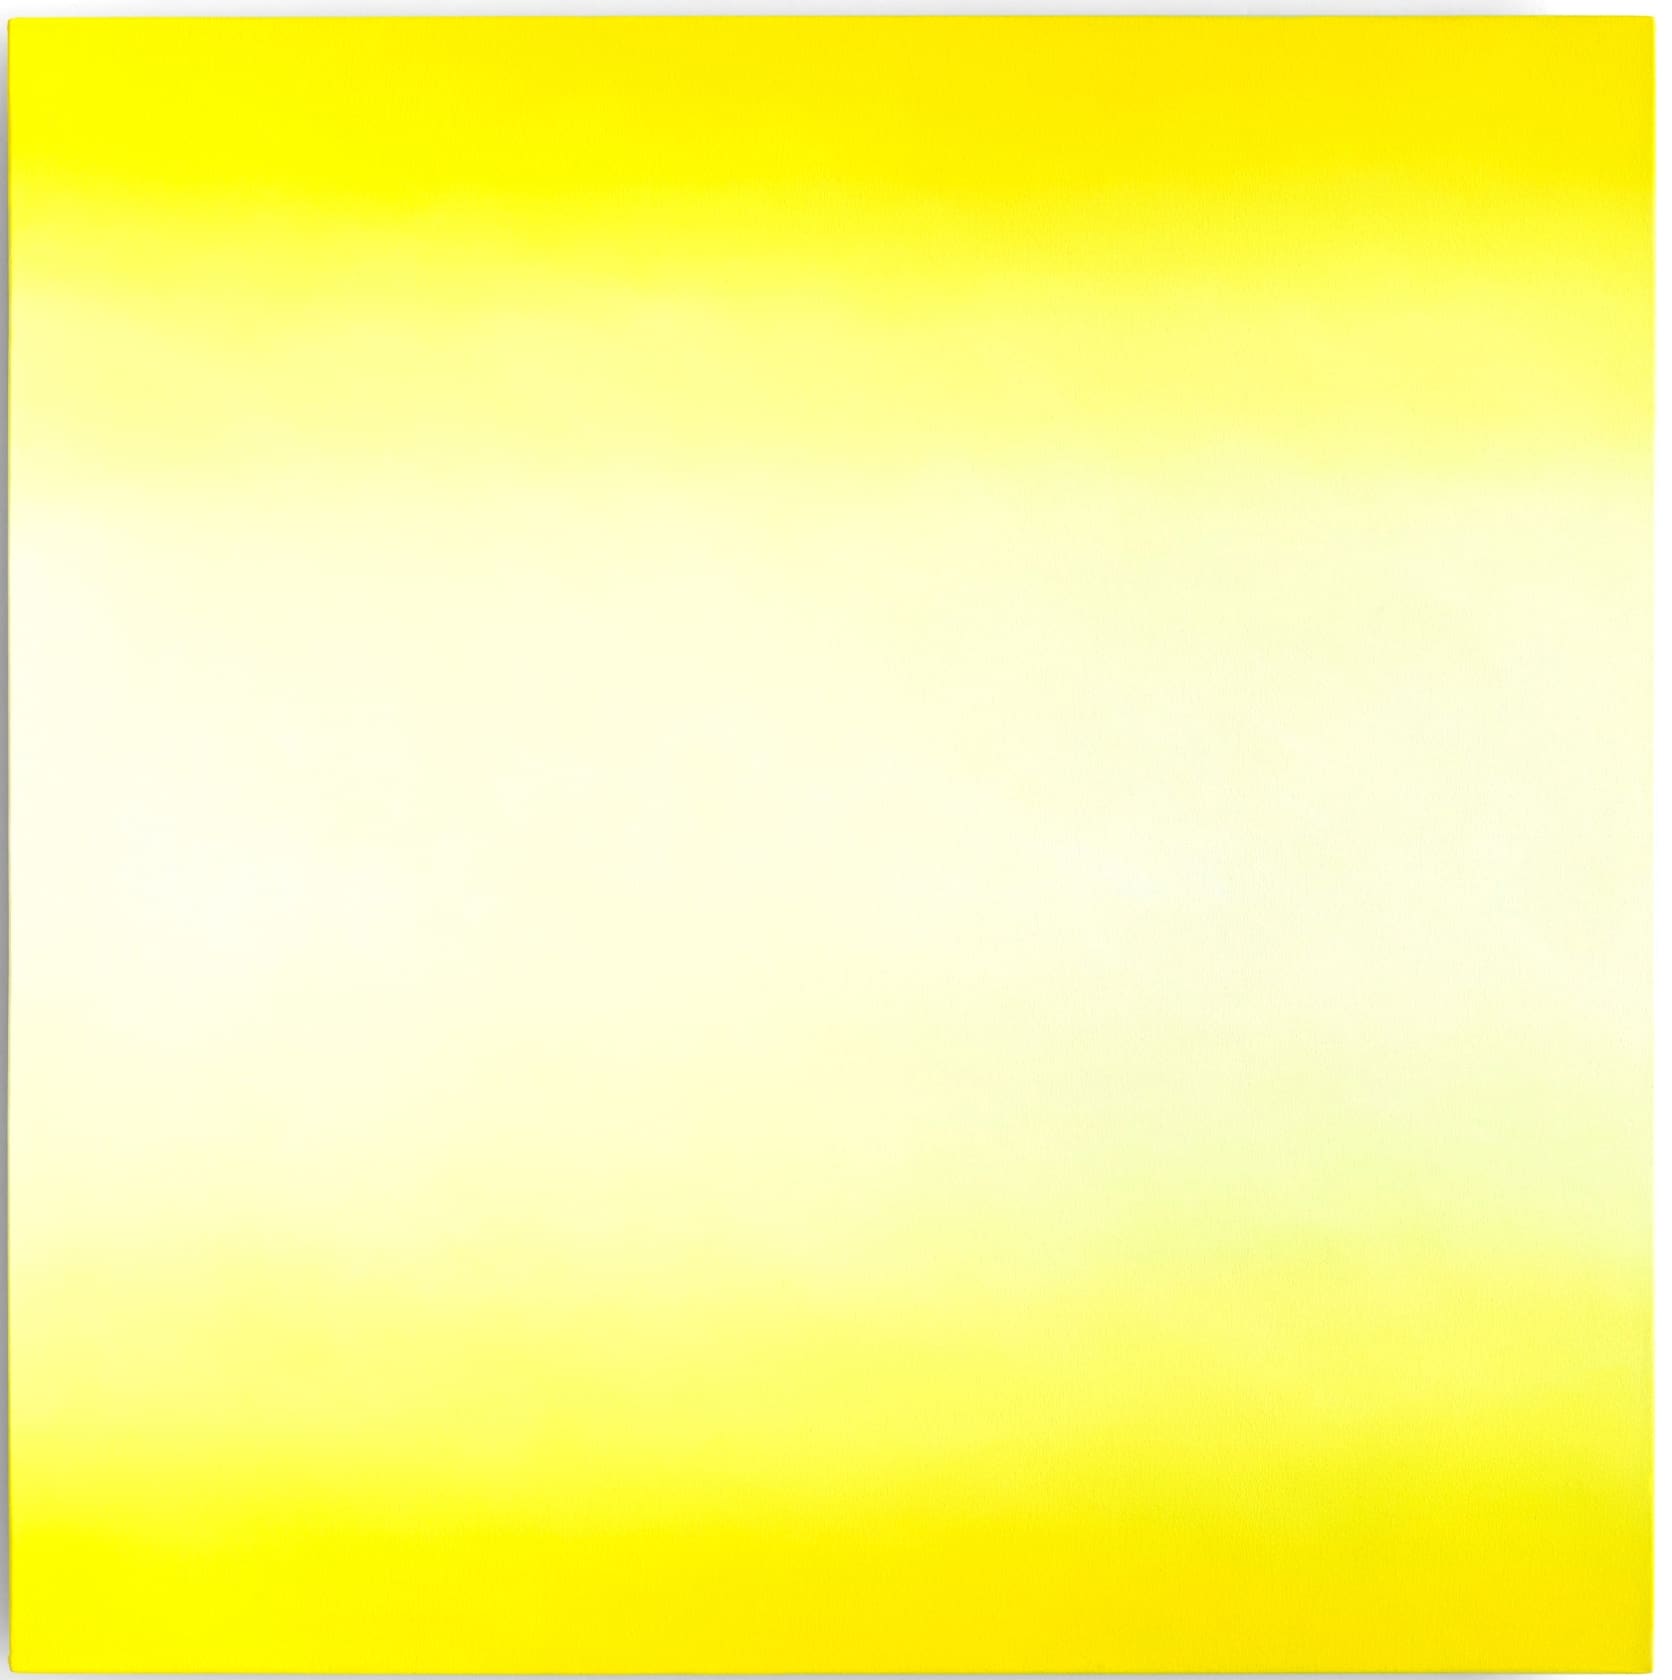 Ruth Pastine, Yellow, Presence Absence Series, 2021